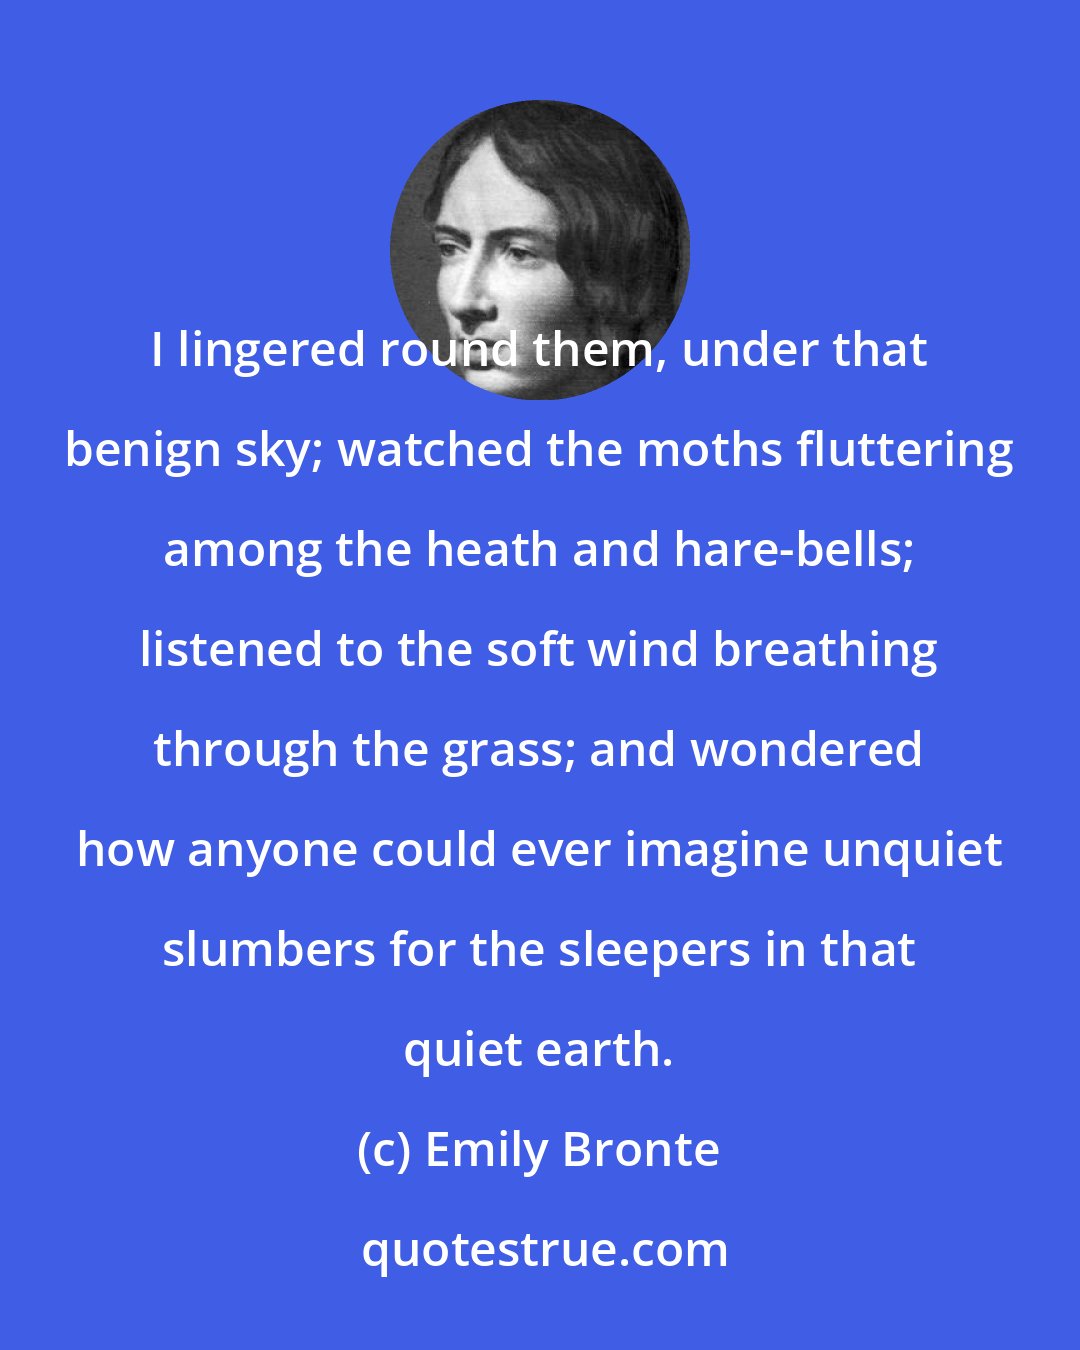 Emily Bronte: I lingered round them, under that benign sky; watched the moths fluttering among the heath and hare-bells; listened to the soft wind breathing through the grass; and wondered how anyone could ever imagine unquiet slumbers for the sleepers in that quiet earth.